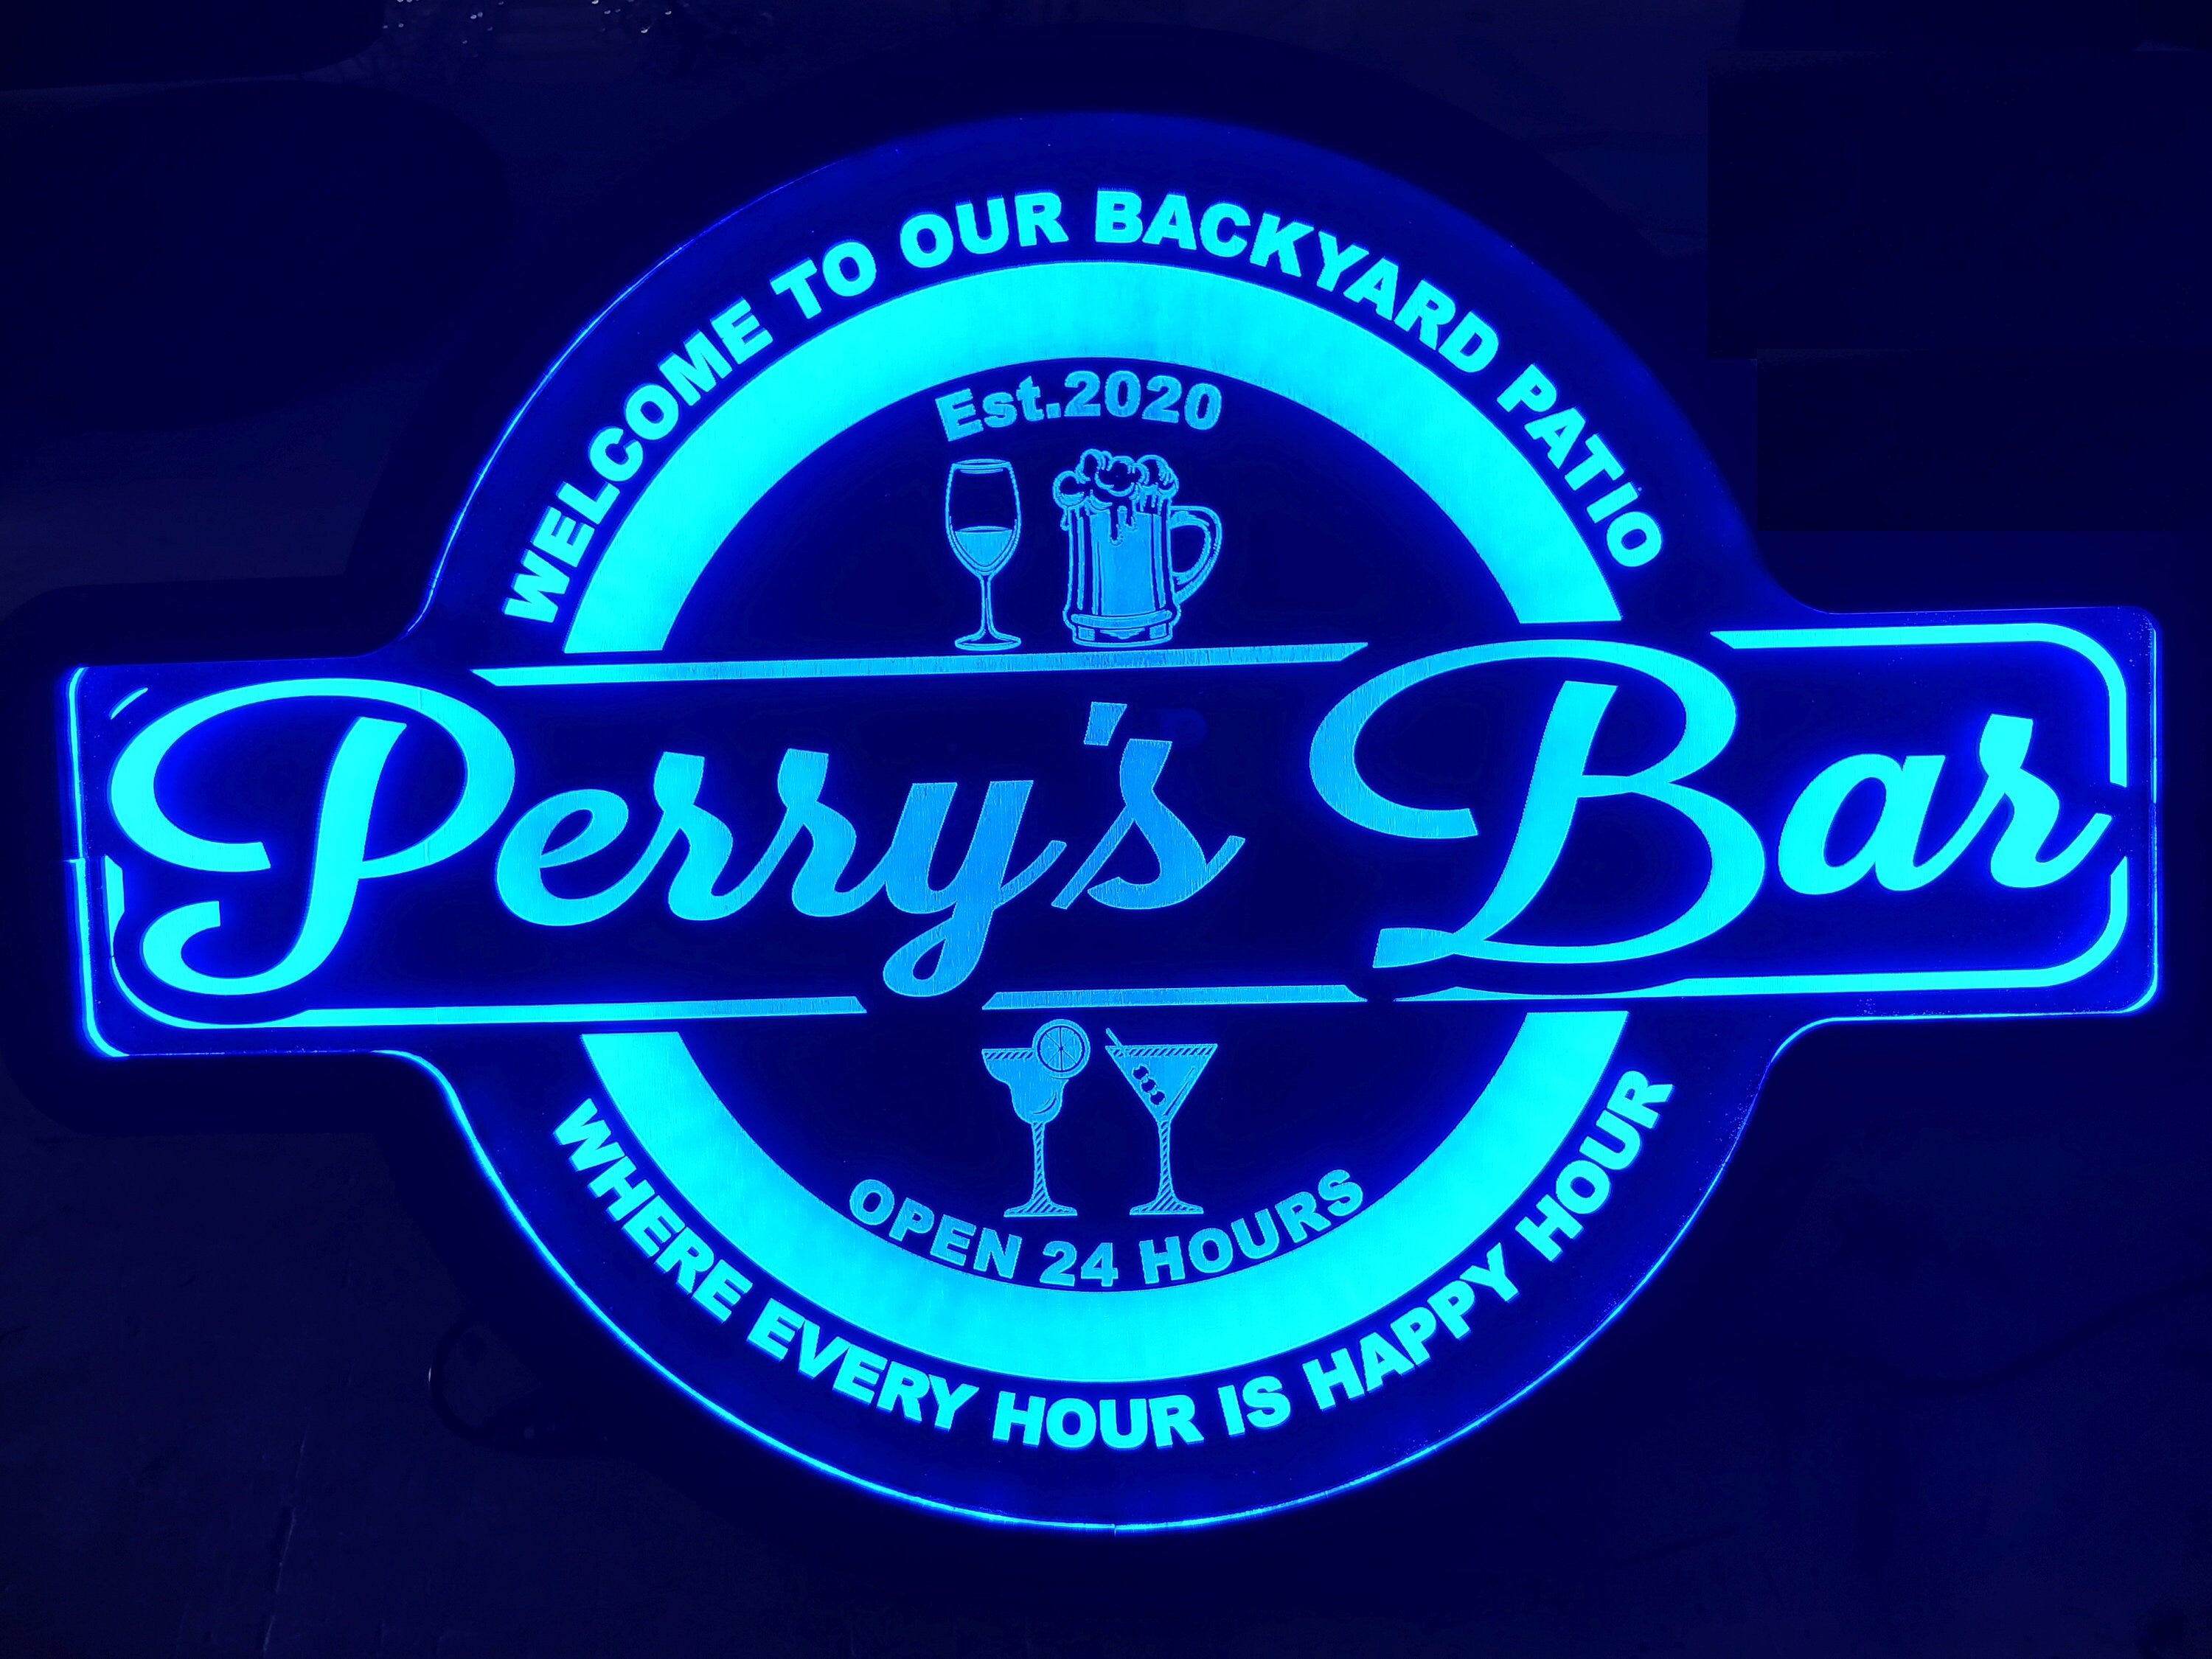 Custom Bar Glasses Led Wall Sign Neon Like - Color Changing Remote Control - 4 Sizes Free Shipping